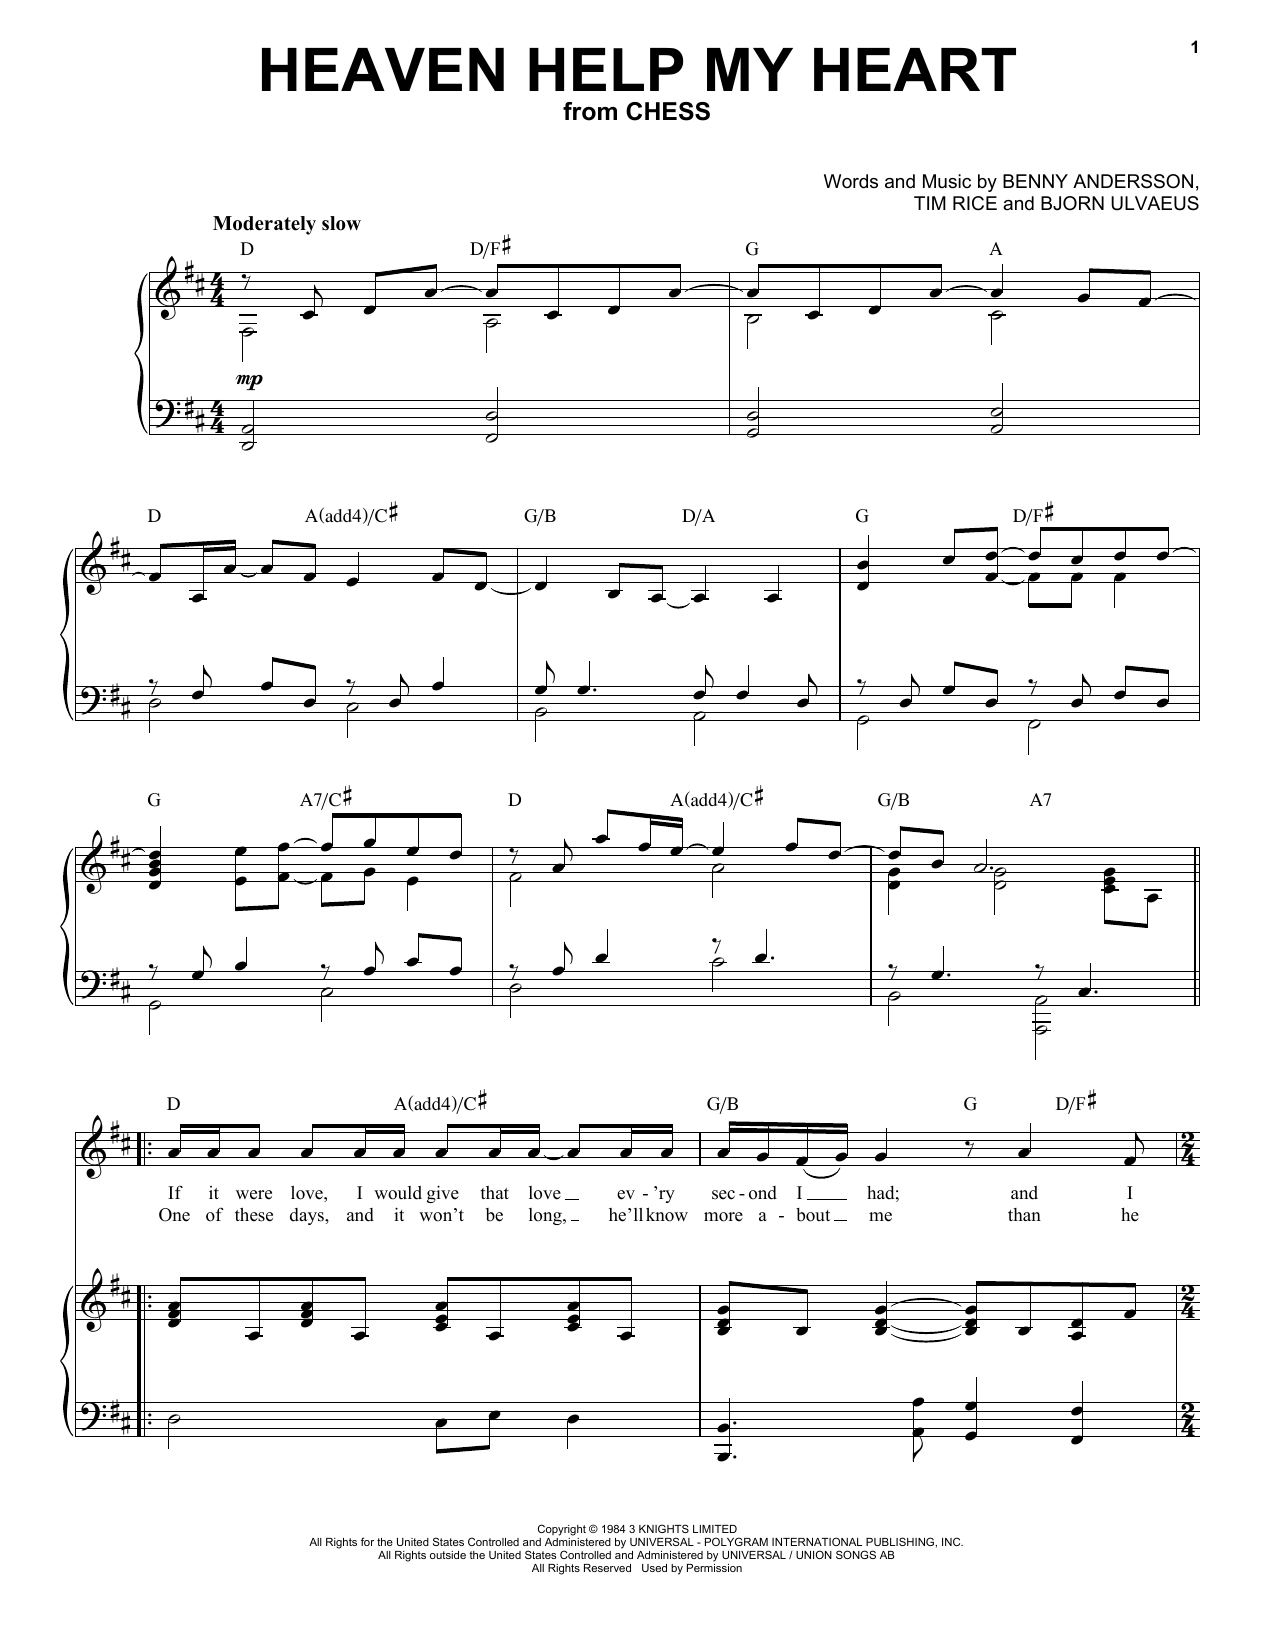 Download ANDERSSON And ULVAEUS Heaven Help My Heart (from Chess) Sheet Music